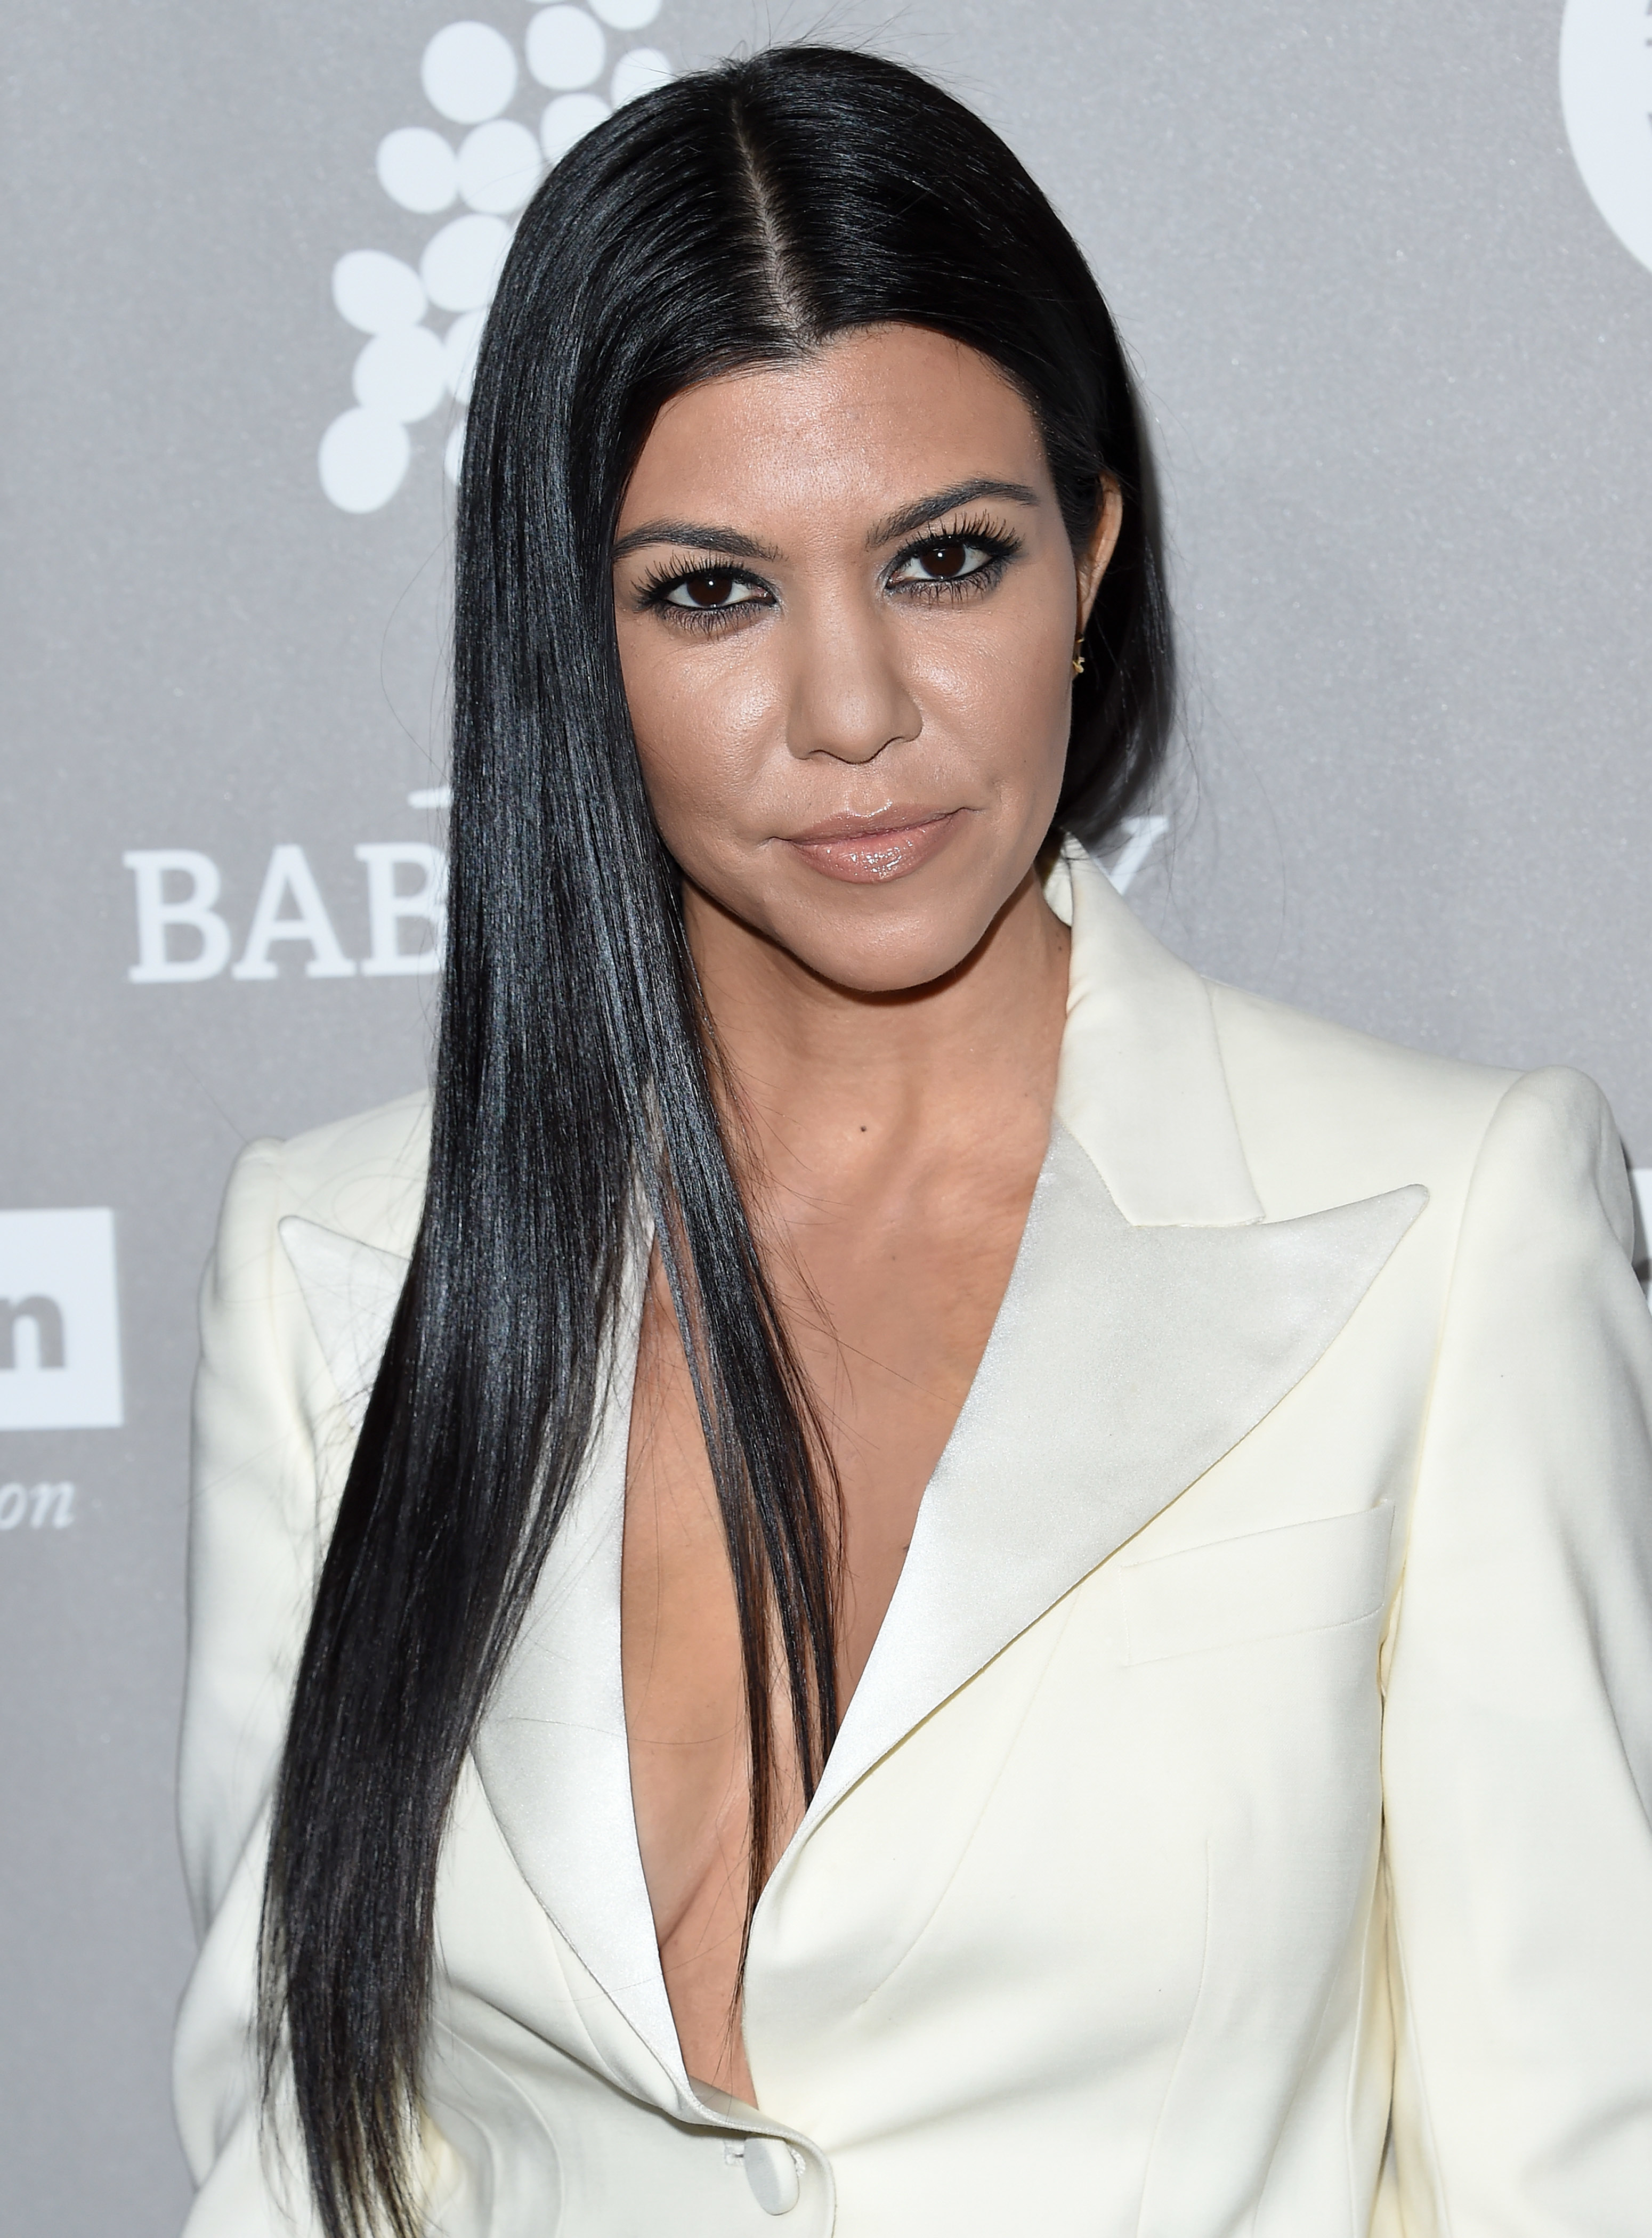 Close-up of Kourtney at a media event wearing a suit jacket